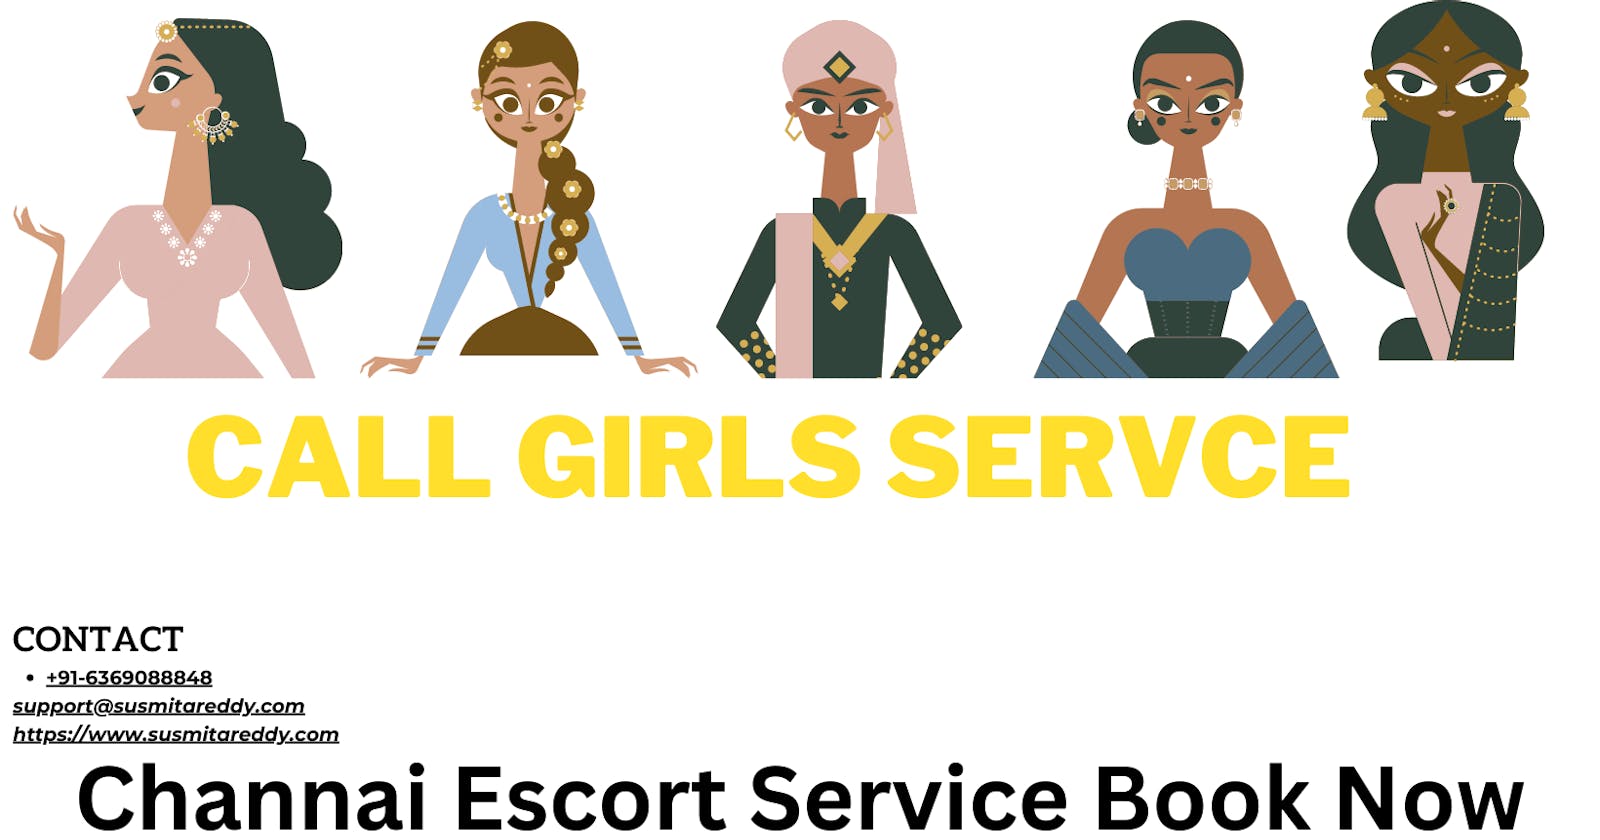 Hotel Chennai escort girls' services can be reached from any location to meet the demands of their customers